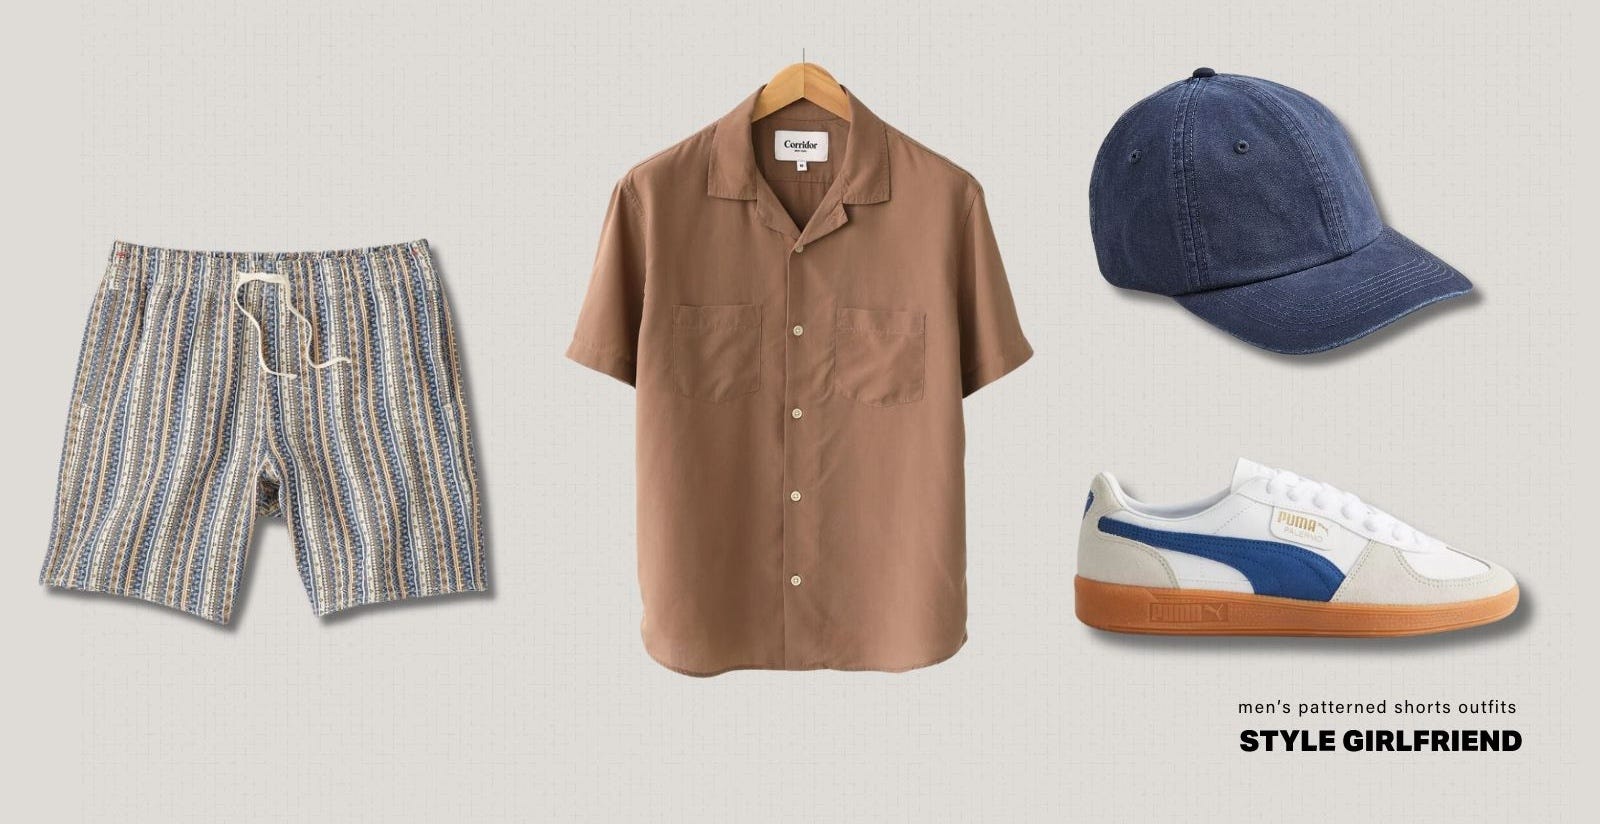 Flat lay of men's casual spring clothing including patterned shorts, brown short sleeve button-down shirt, baseball cap and Puma sneakers